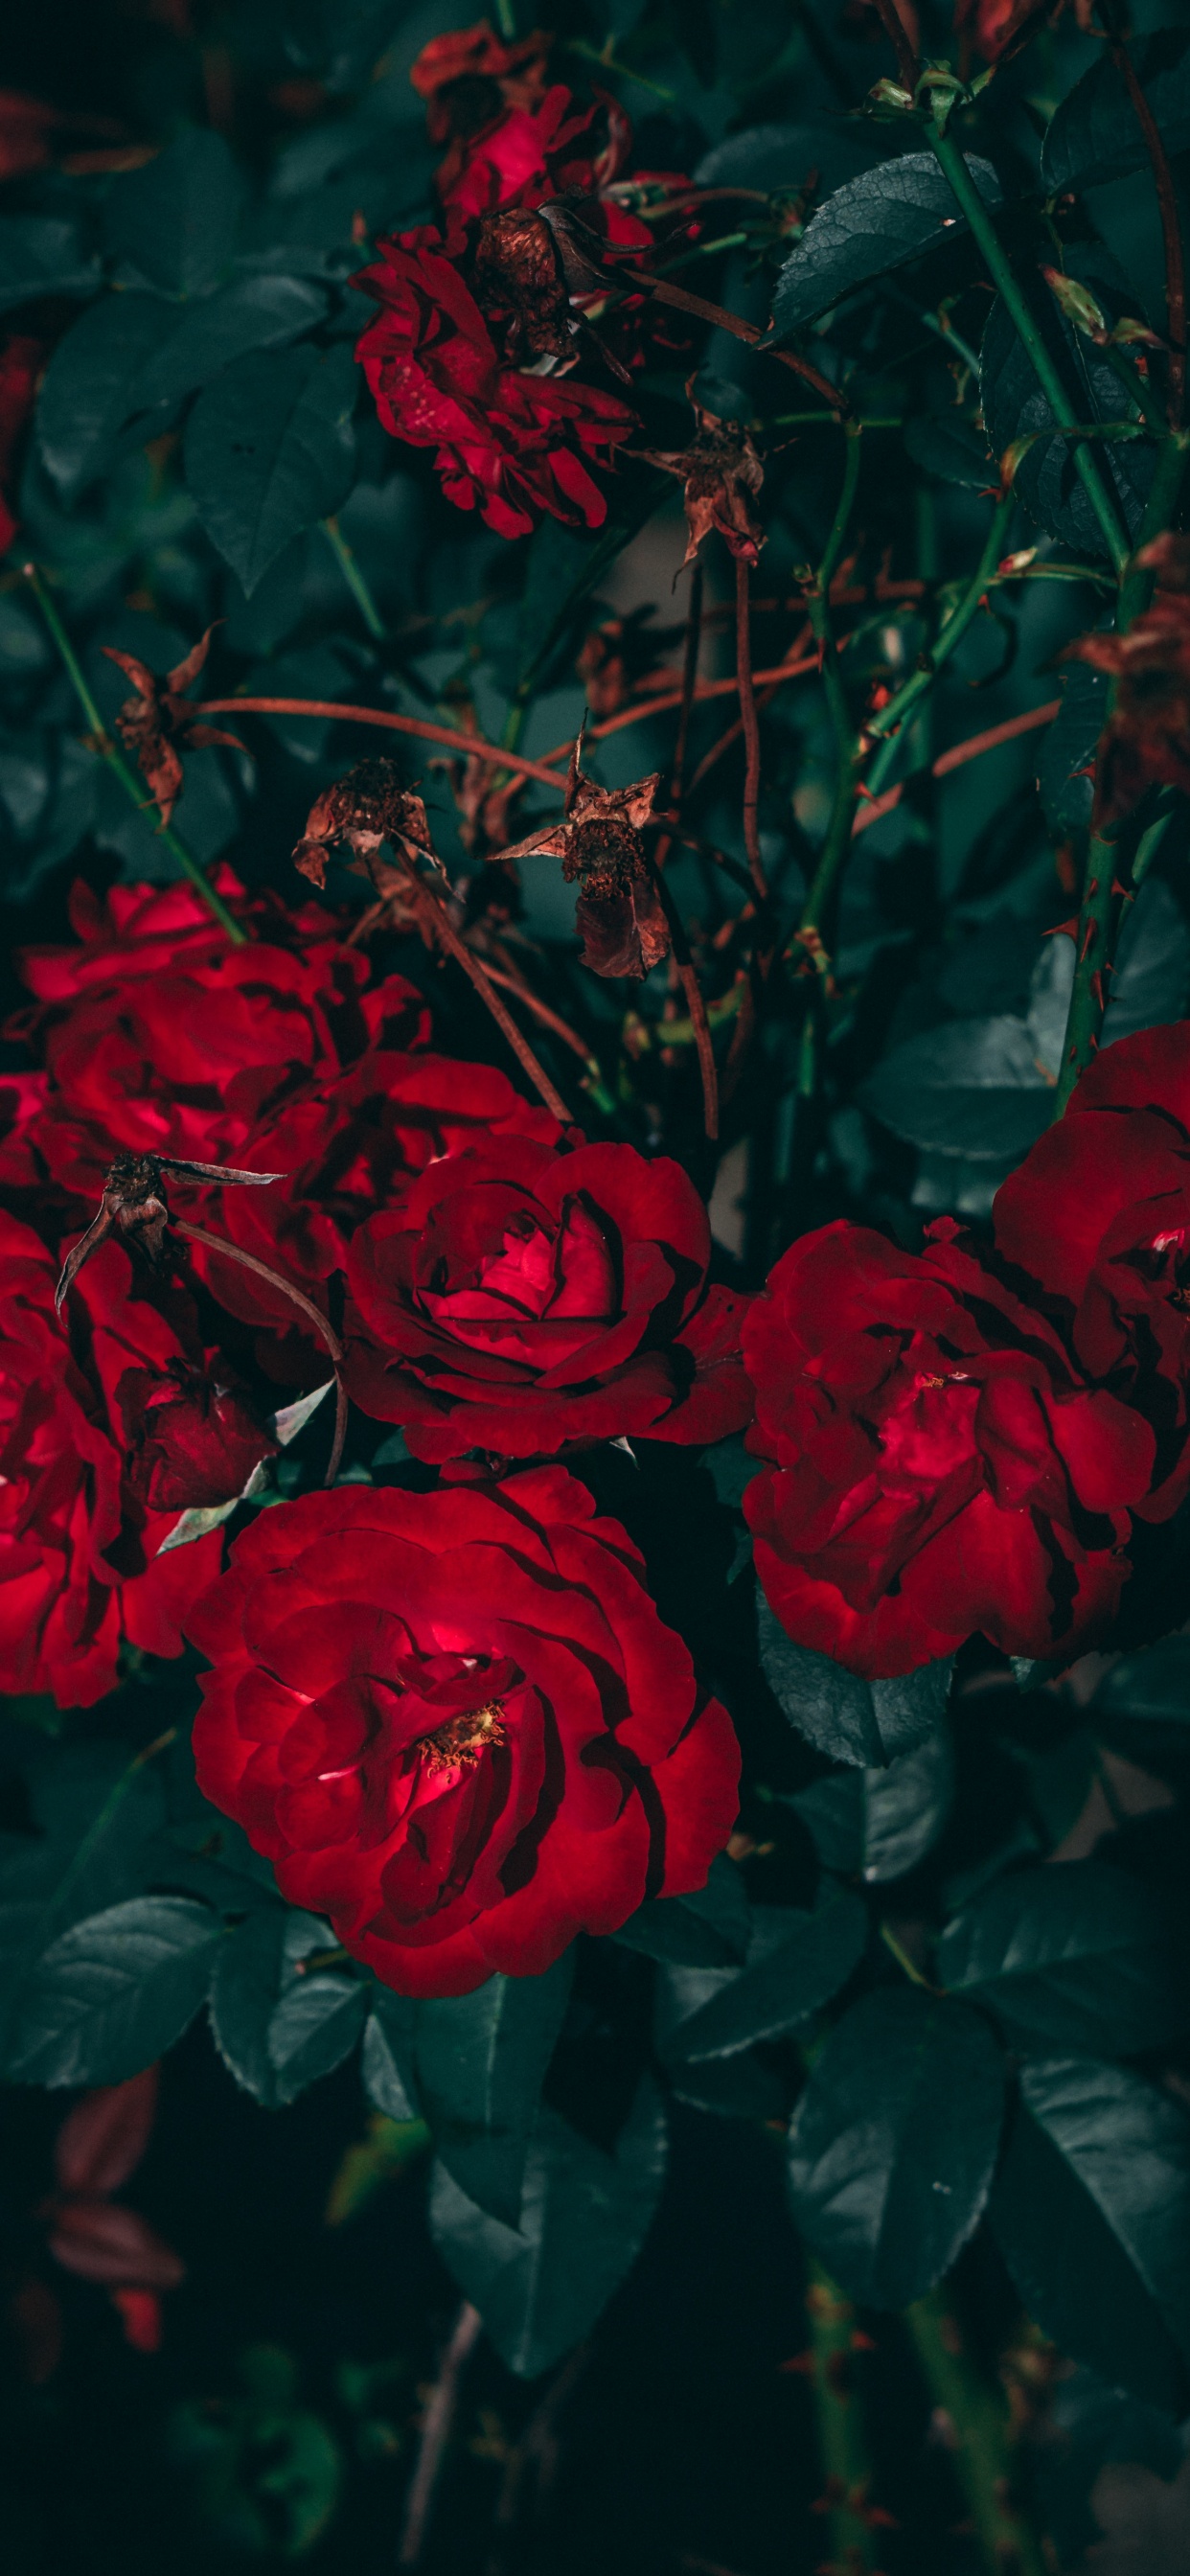 Red Roses in Close up Photography. Wallpaper in 1242x2688 Resolution